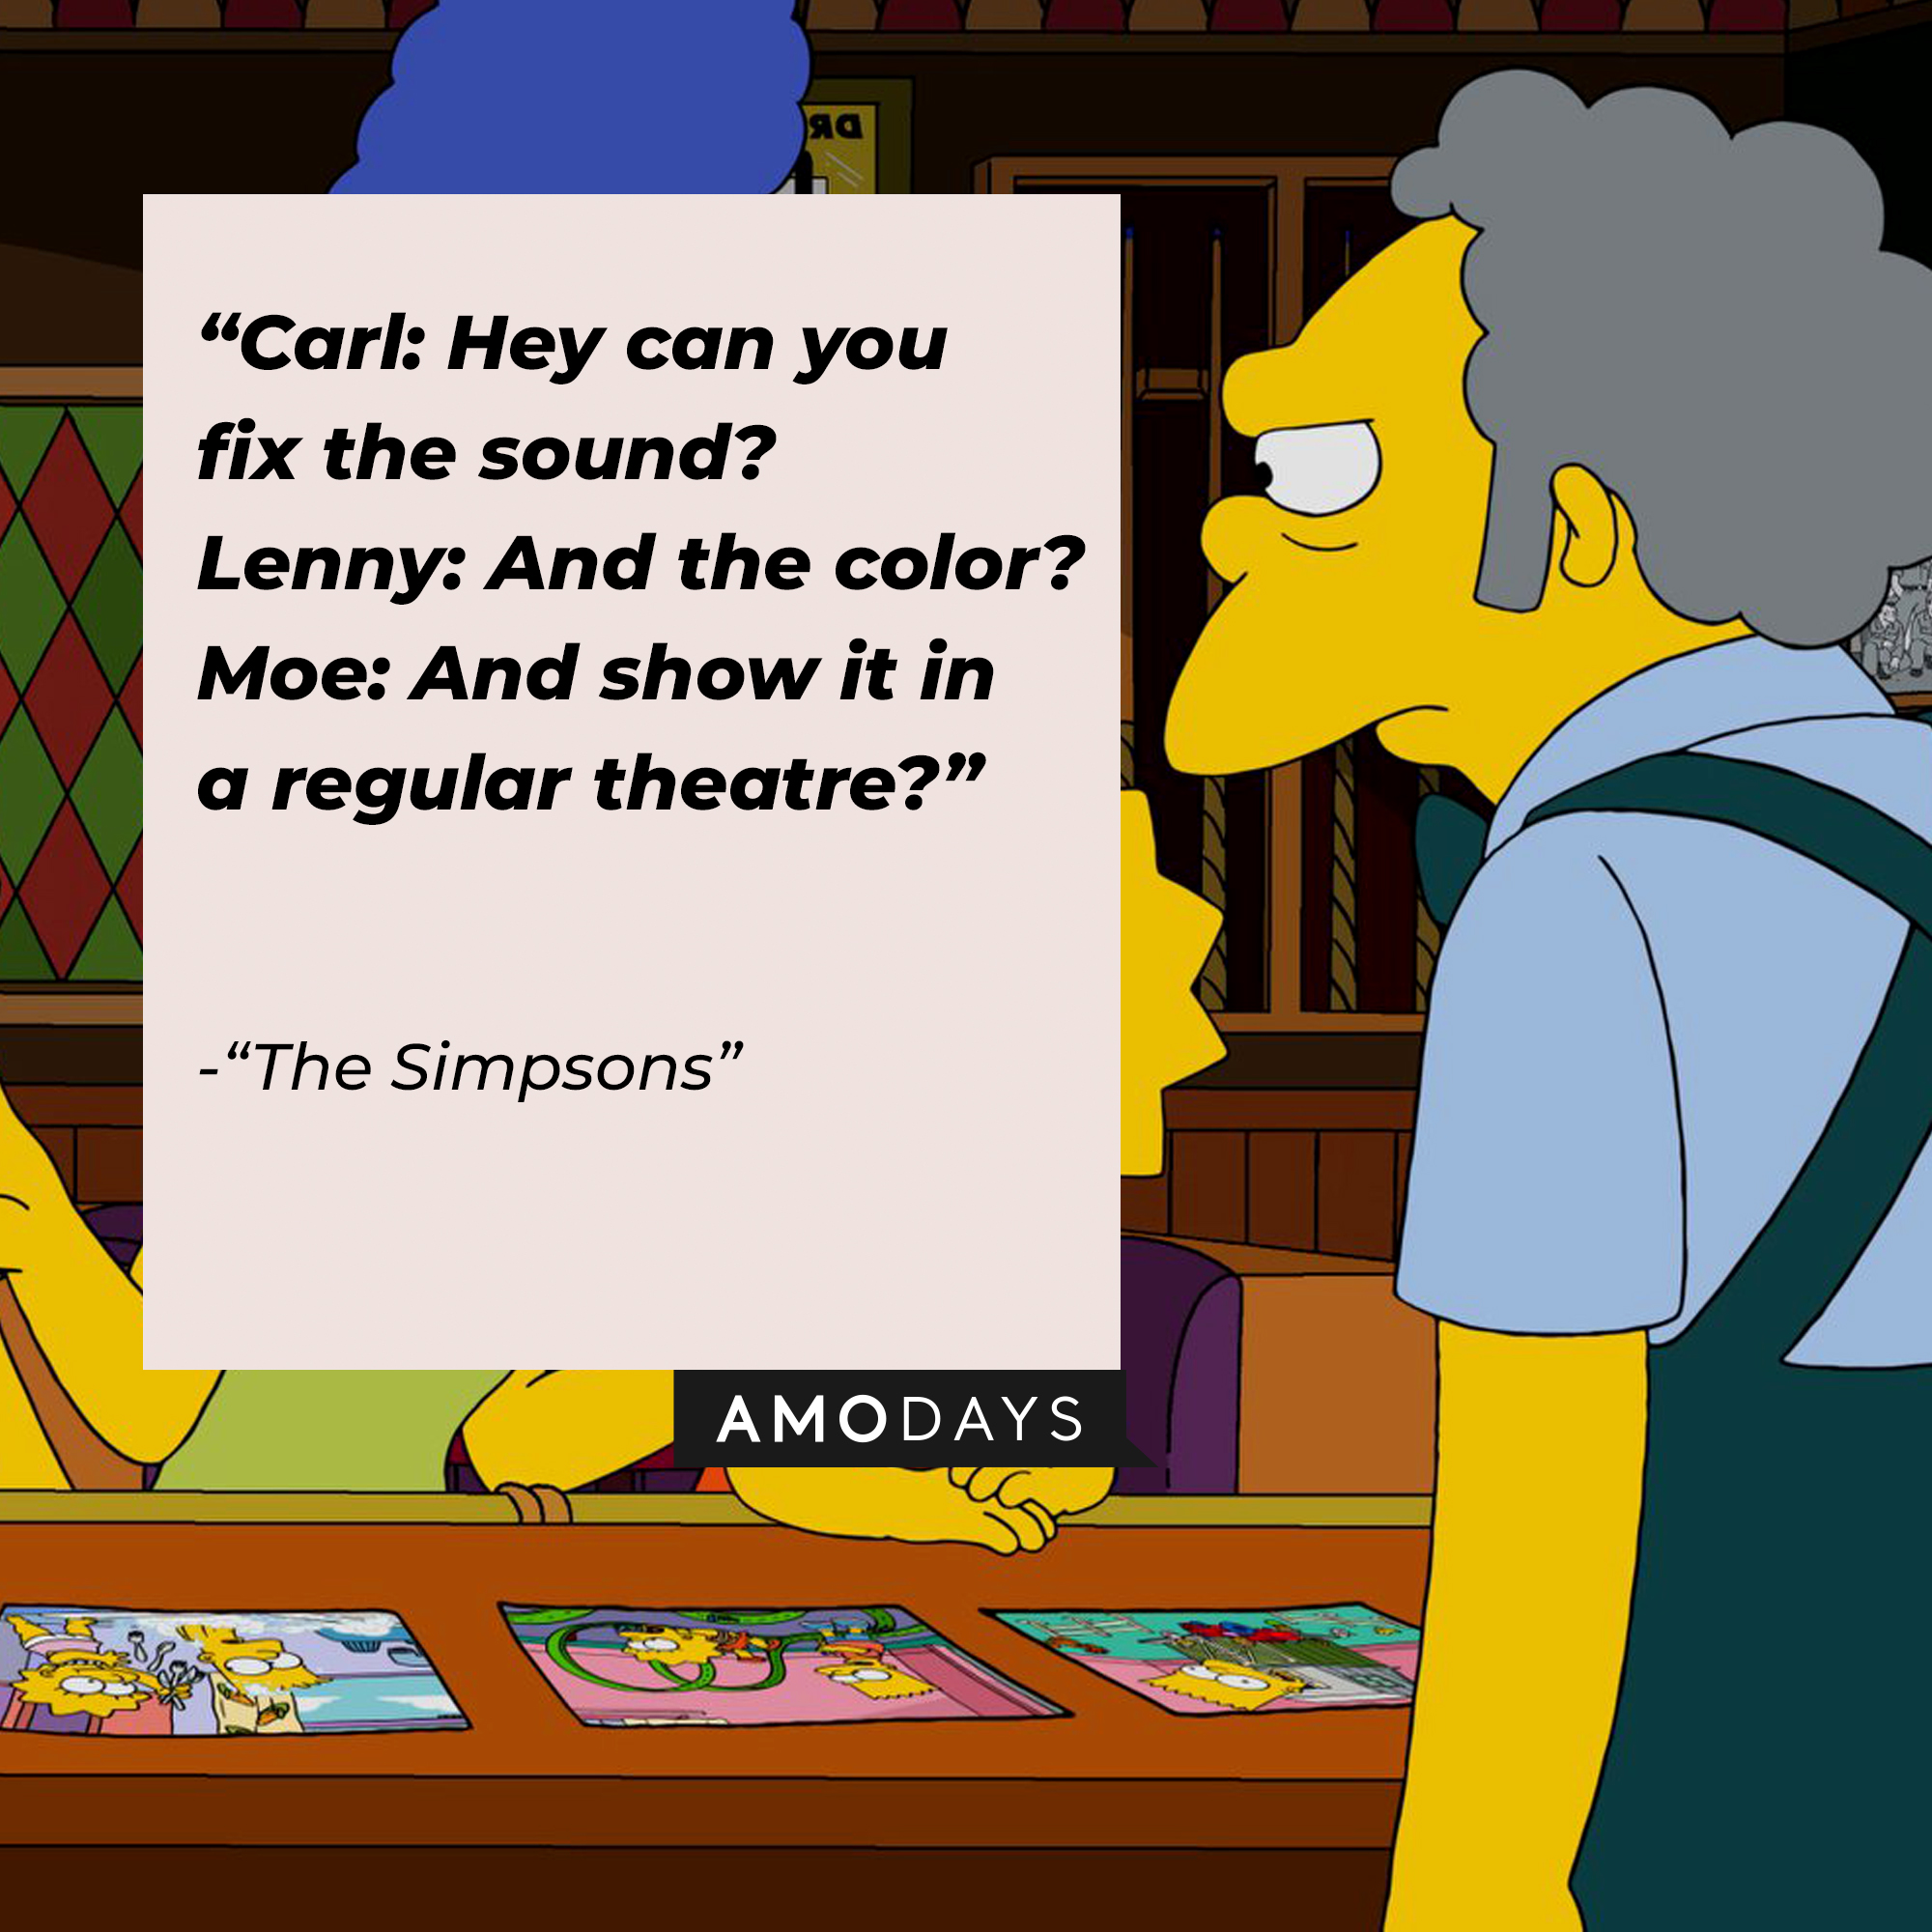 Image of Moe Szyslak with his quote from "The Simpsons:" "Carl: Hey can you fix the sound? ; Lenny: And the color? ; Moe: And show it in a regular theatre?" | Source: Facebook.com/TheSimpsons